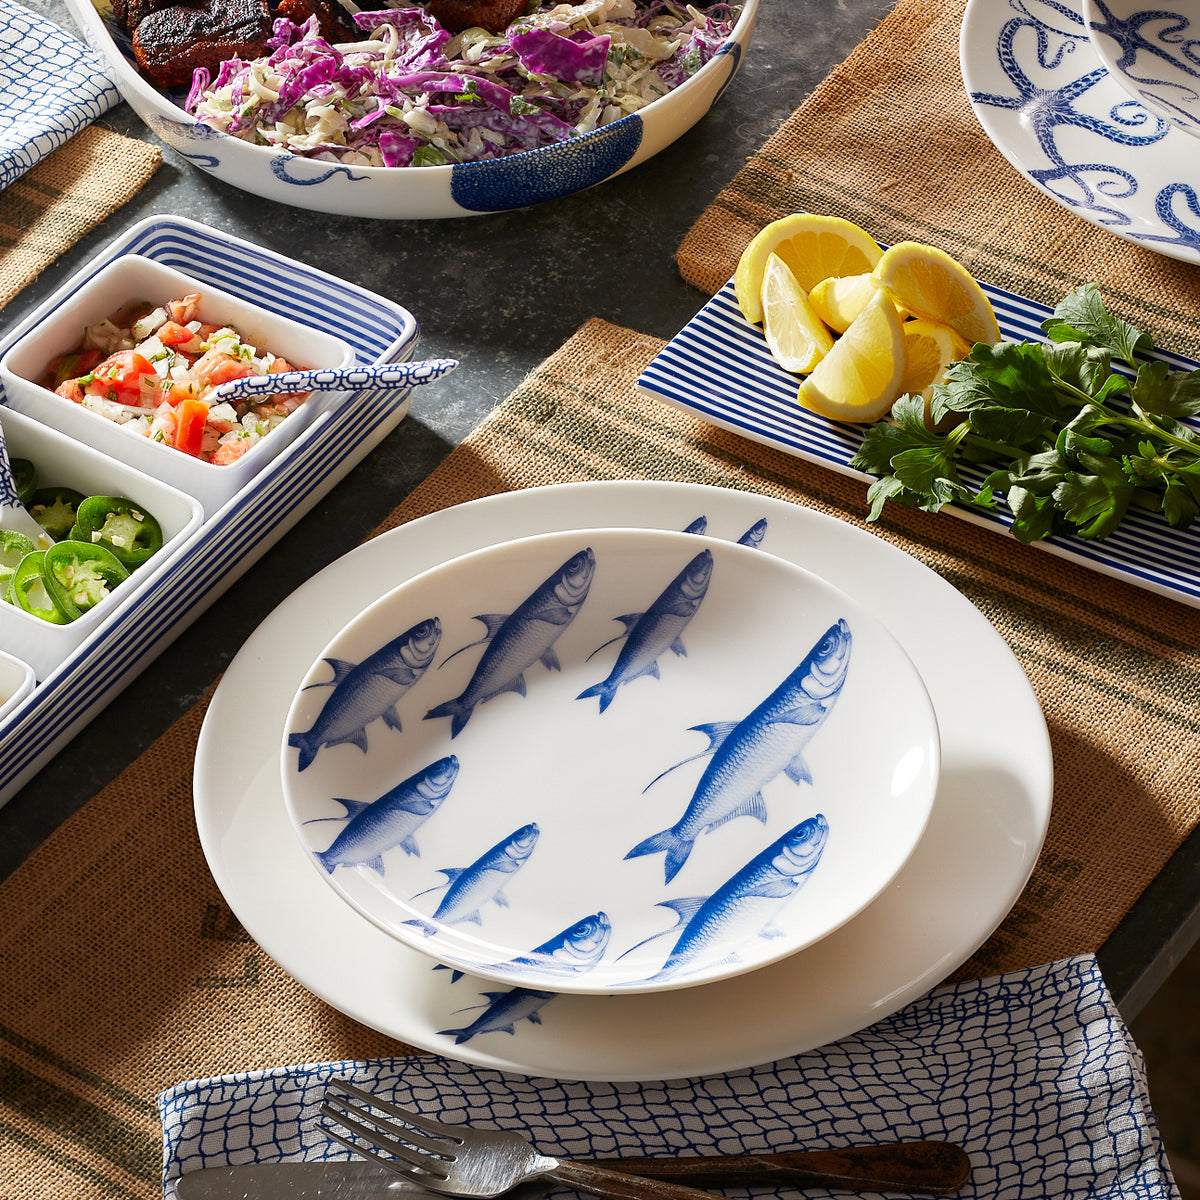 A Caskata Artisanal Home School of Fish Blue Coupe Dinner Plate with a school of fish on it.